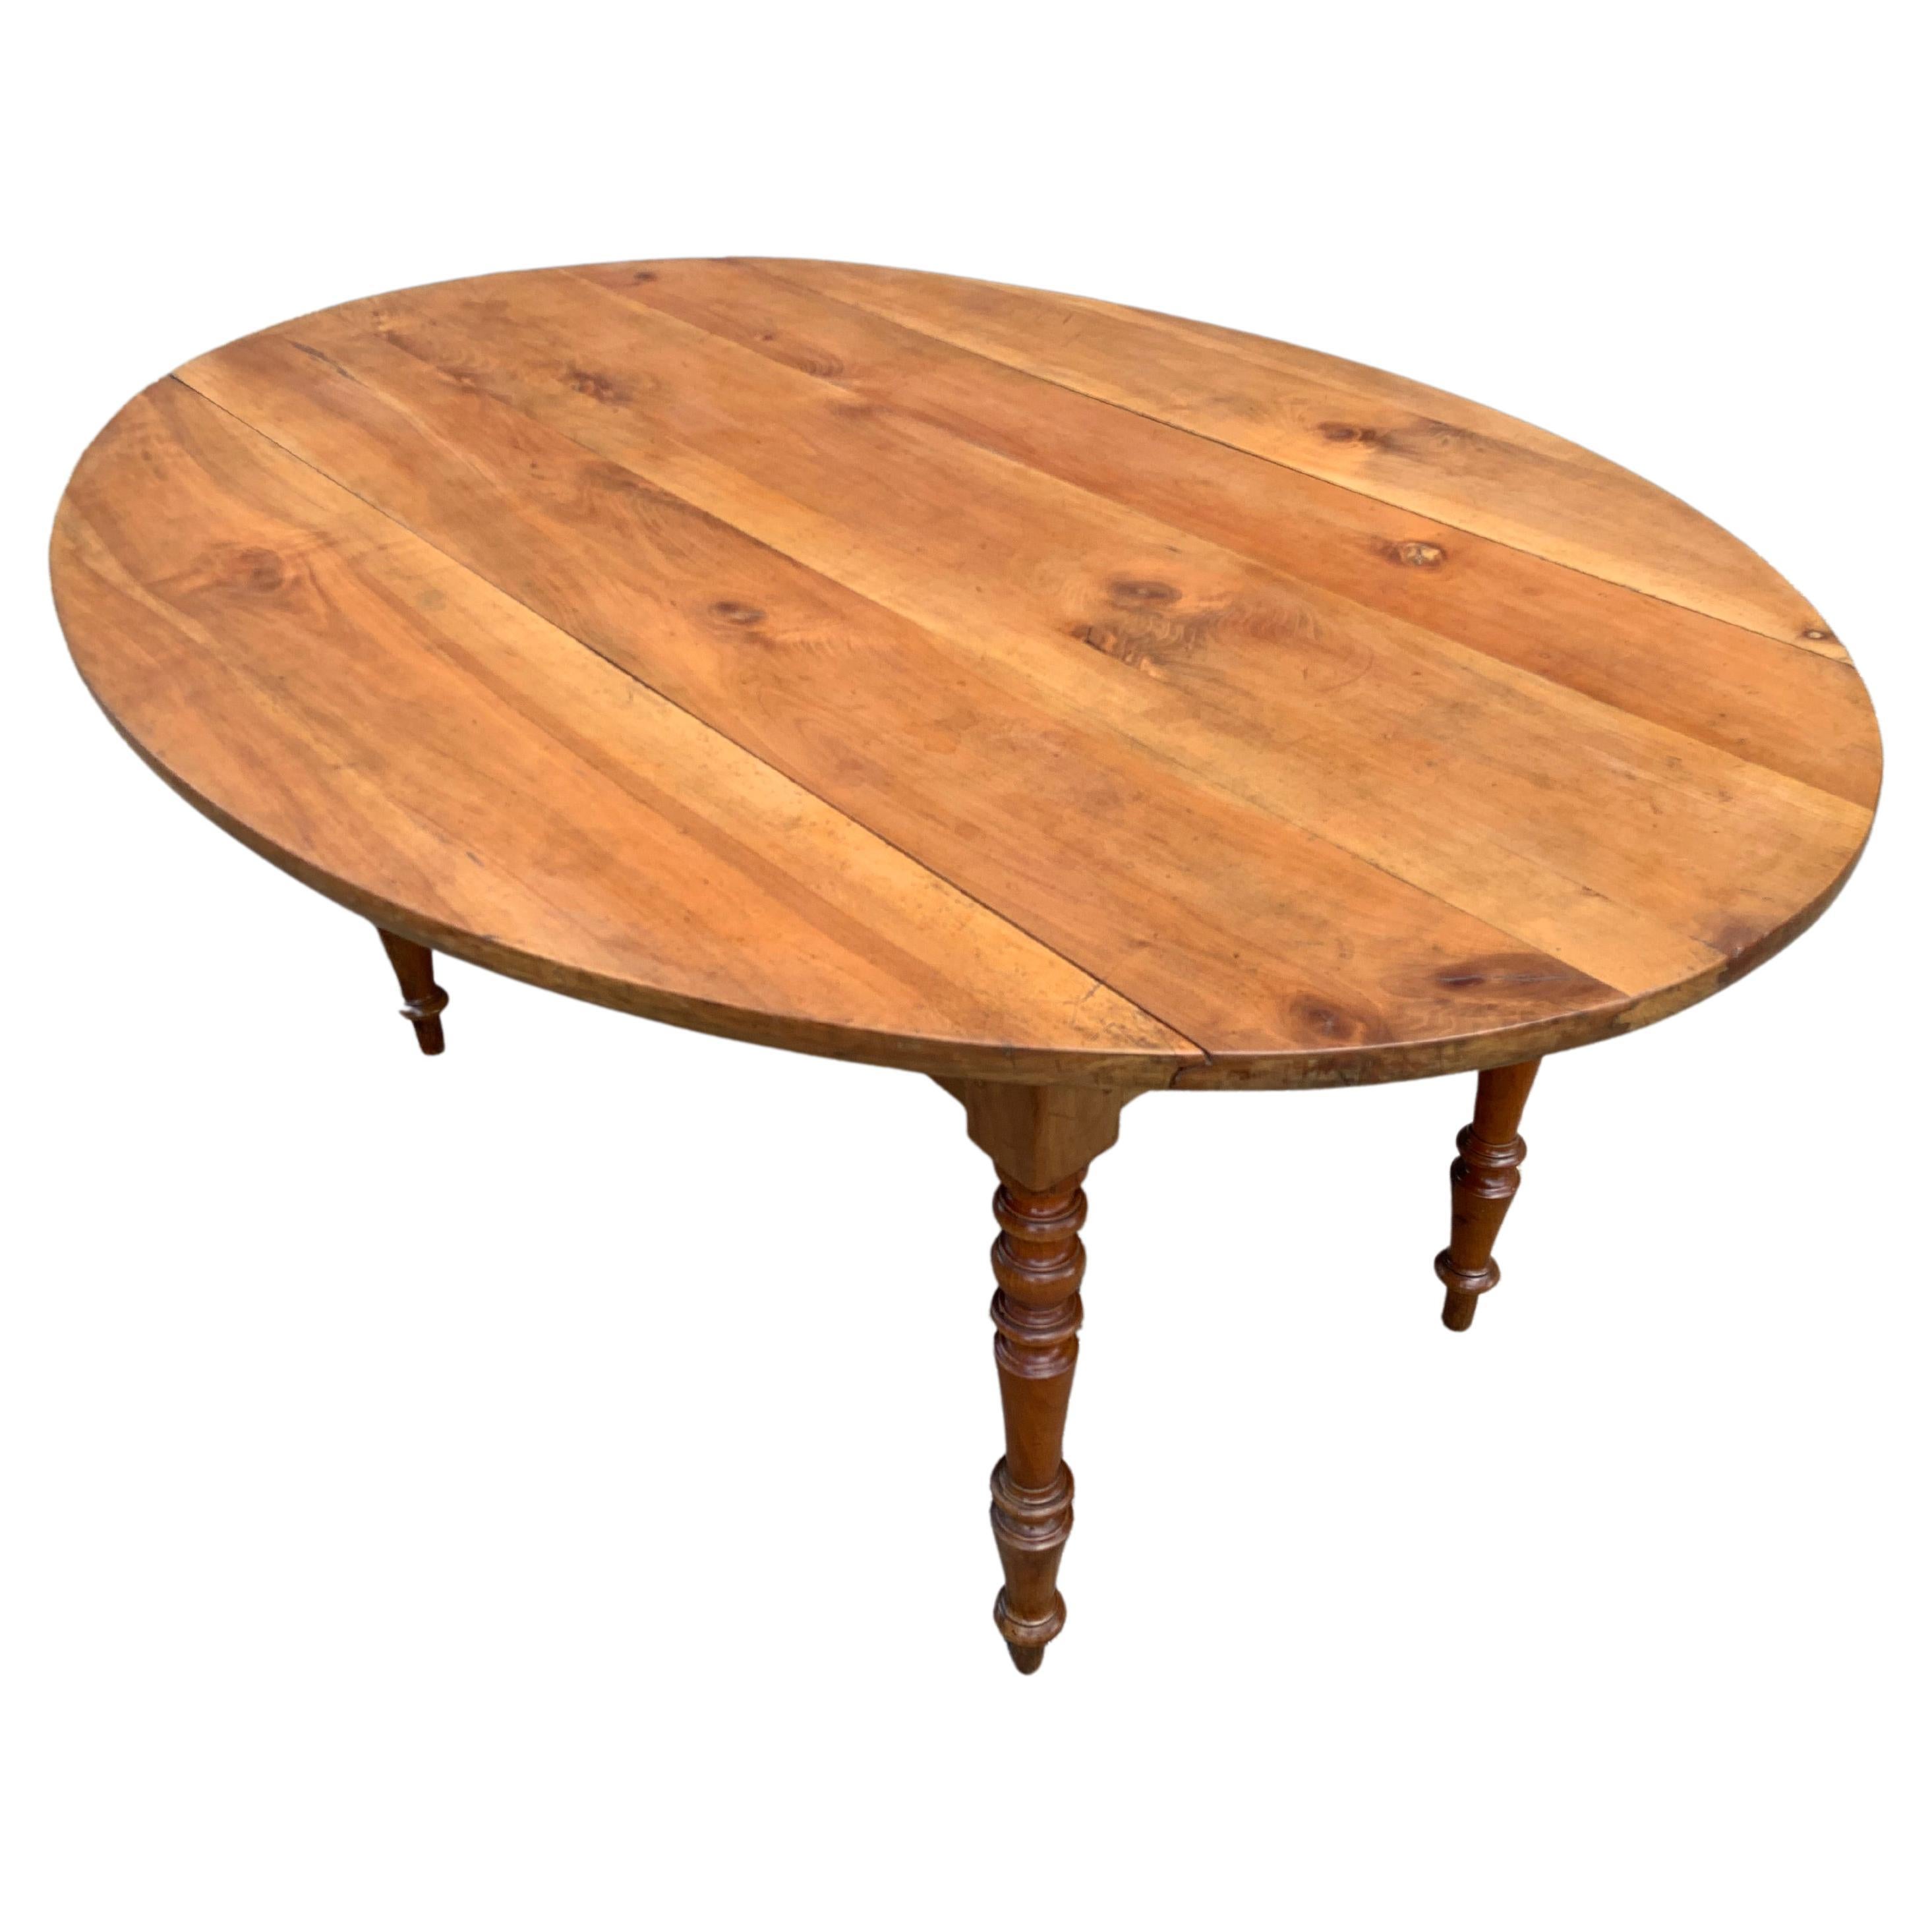 Antique Cherry Tapered Leg Oval Drop Leaf Table